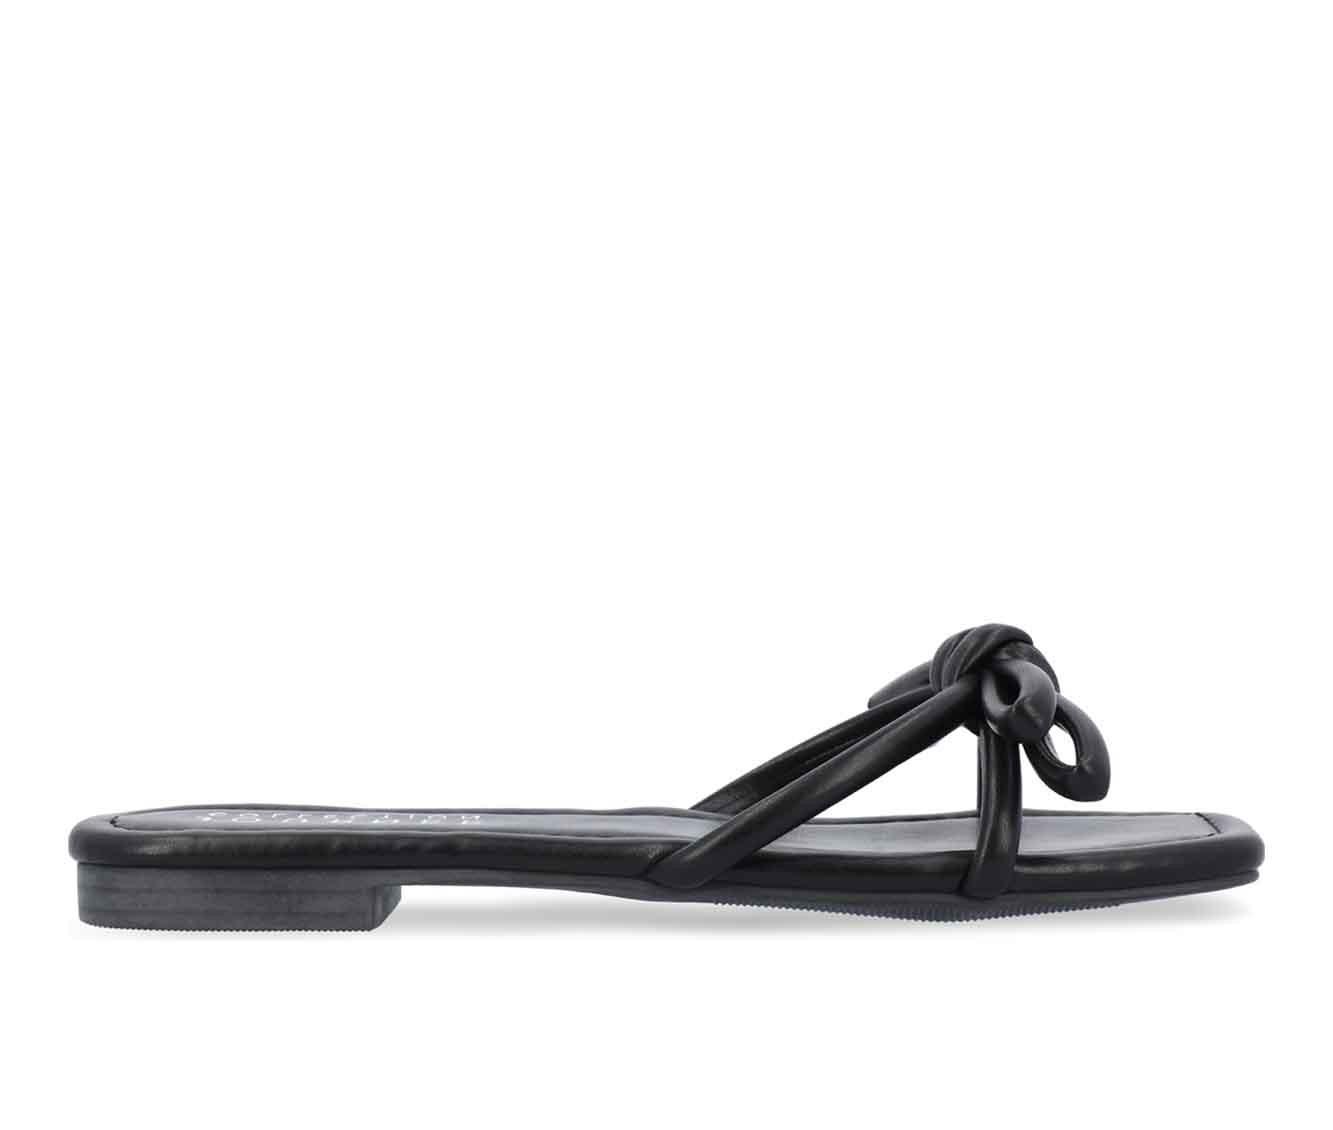 Women's Journee Collection Soma Sandals